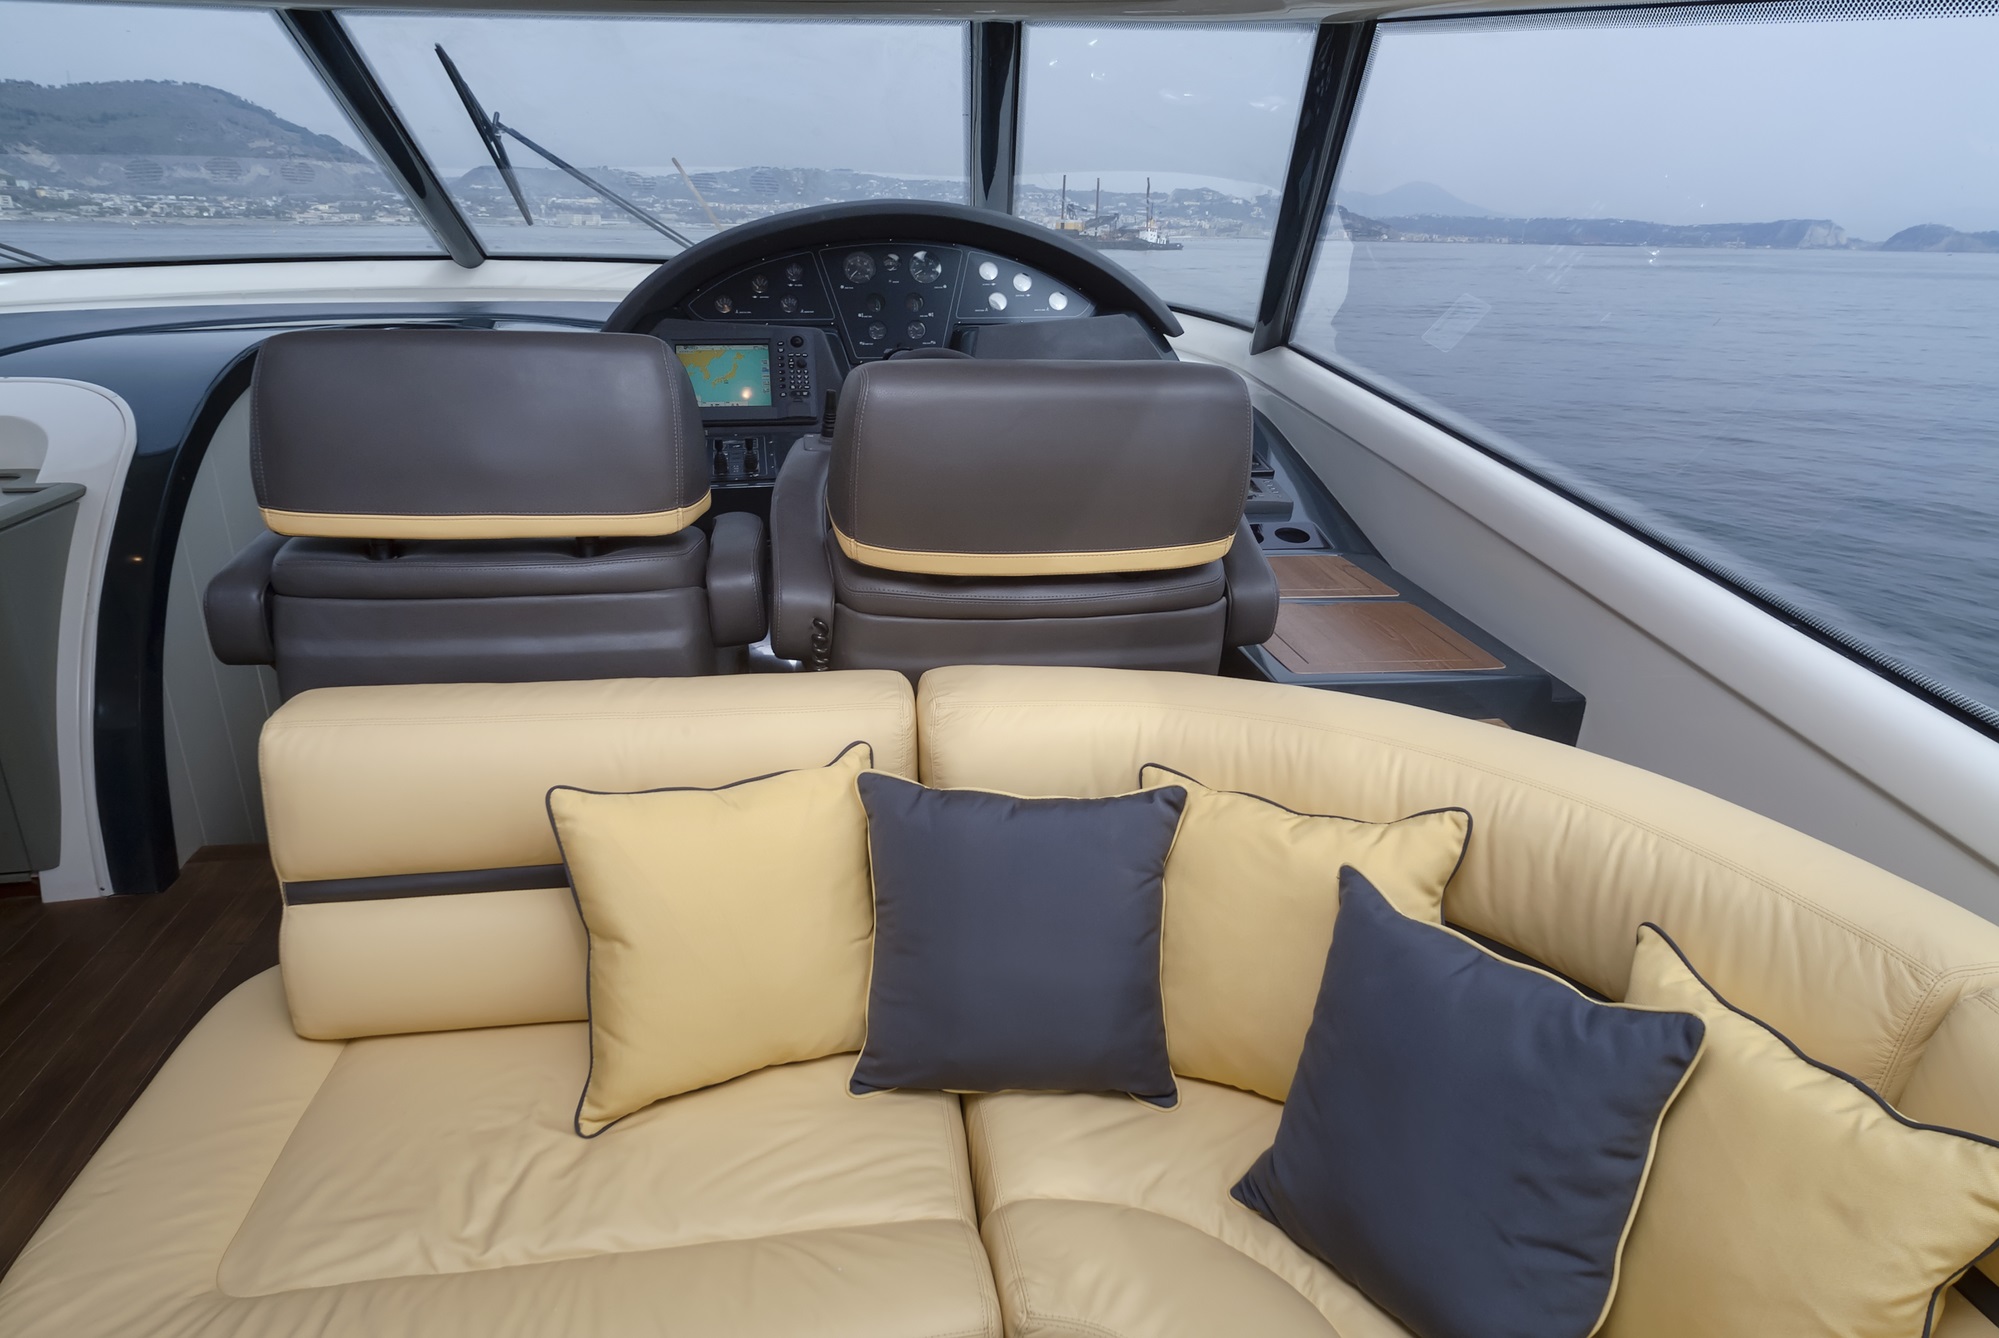 3 Reasons To Hire A Professional For Boat Upholstery